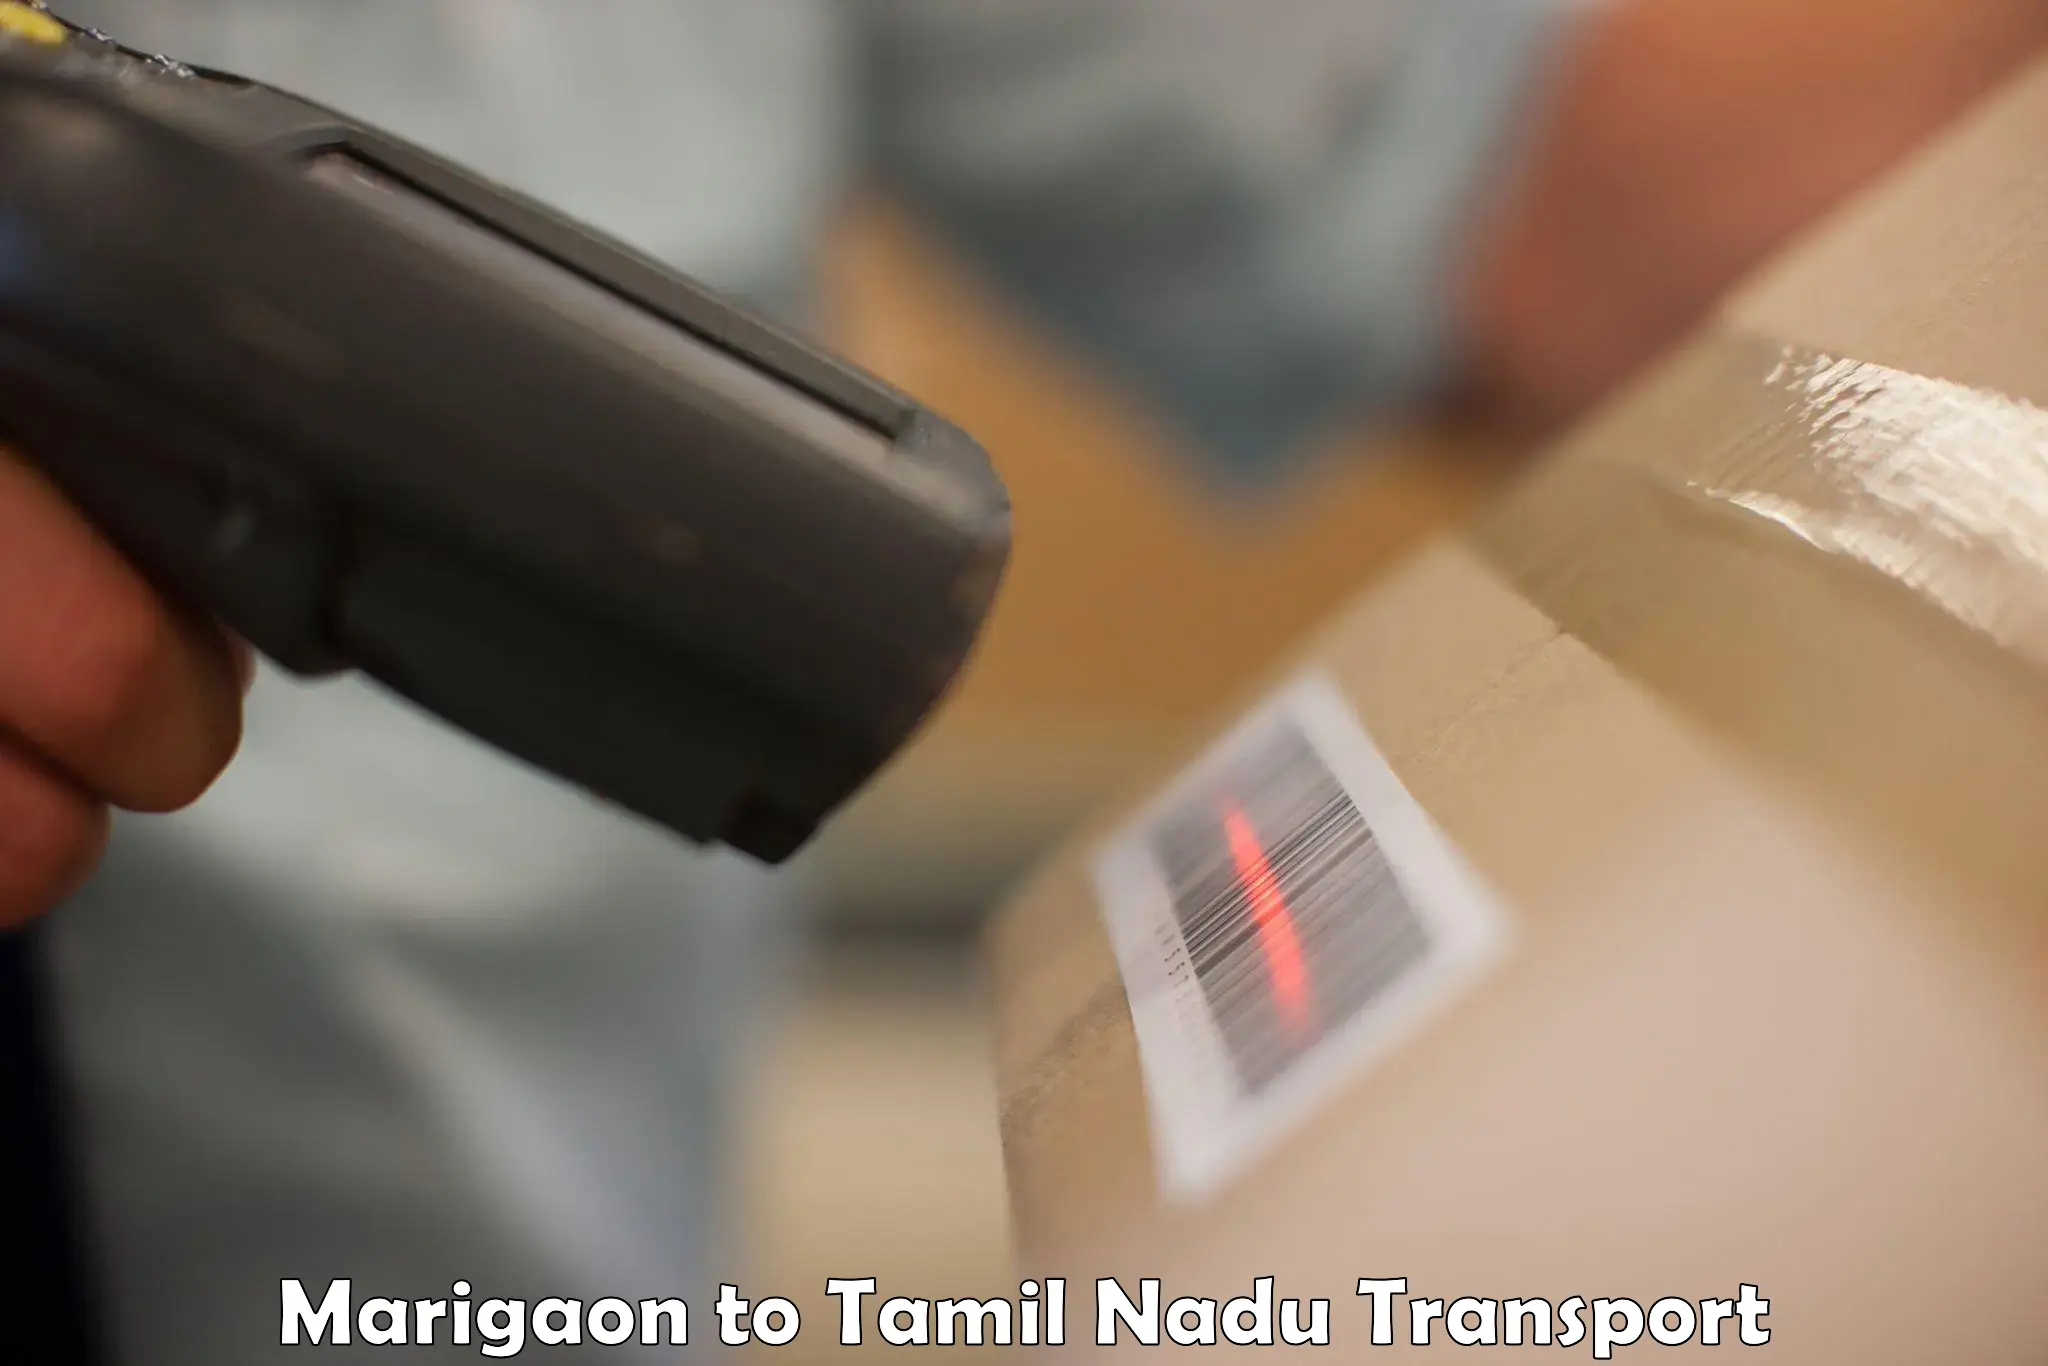 Road transport online services Marigaon to Chennai